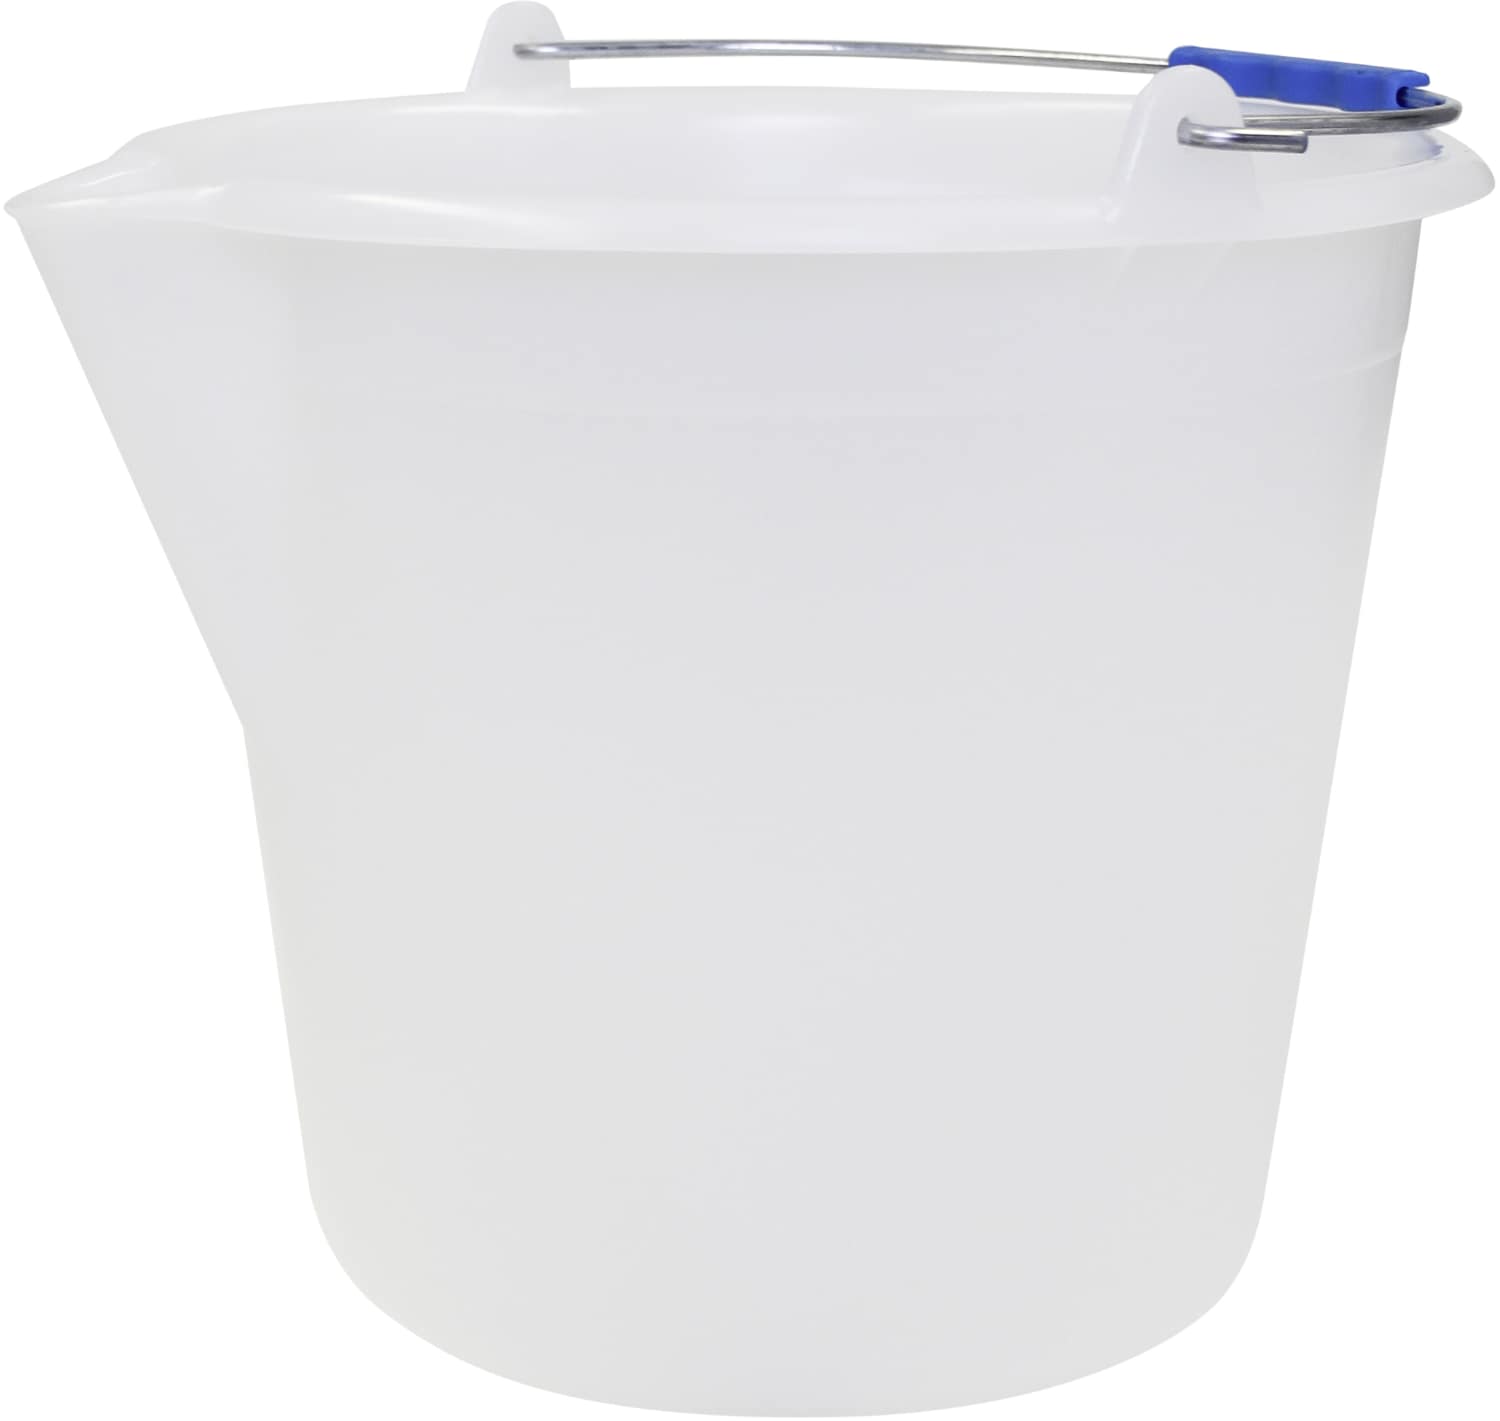 Bucket with spout and metal handle 200880